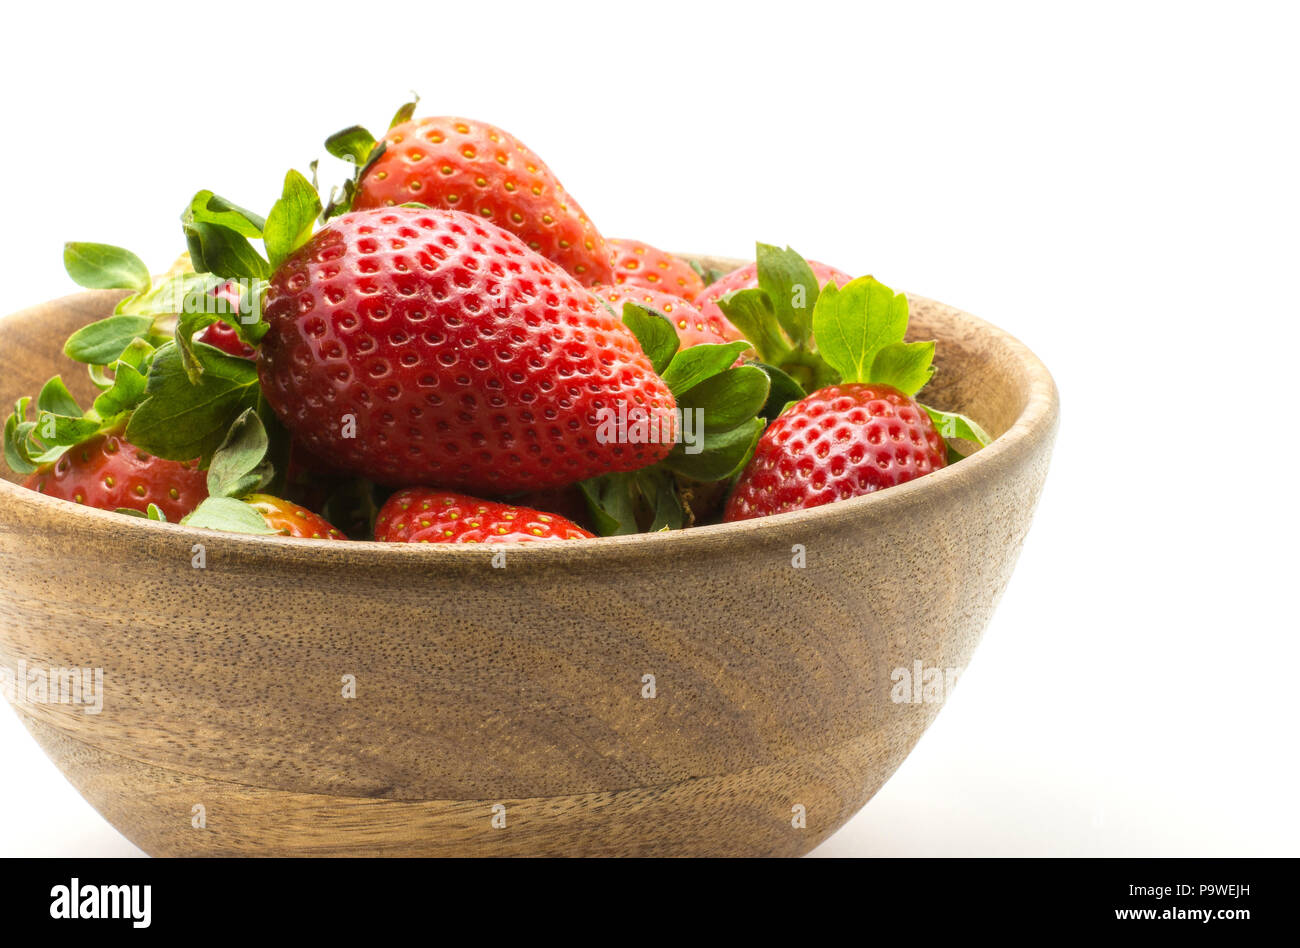 Strawberries in a wooden bowl isolated on white background Stock Photo